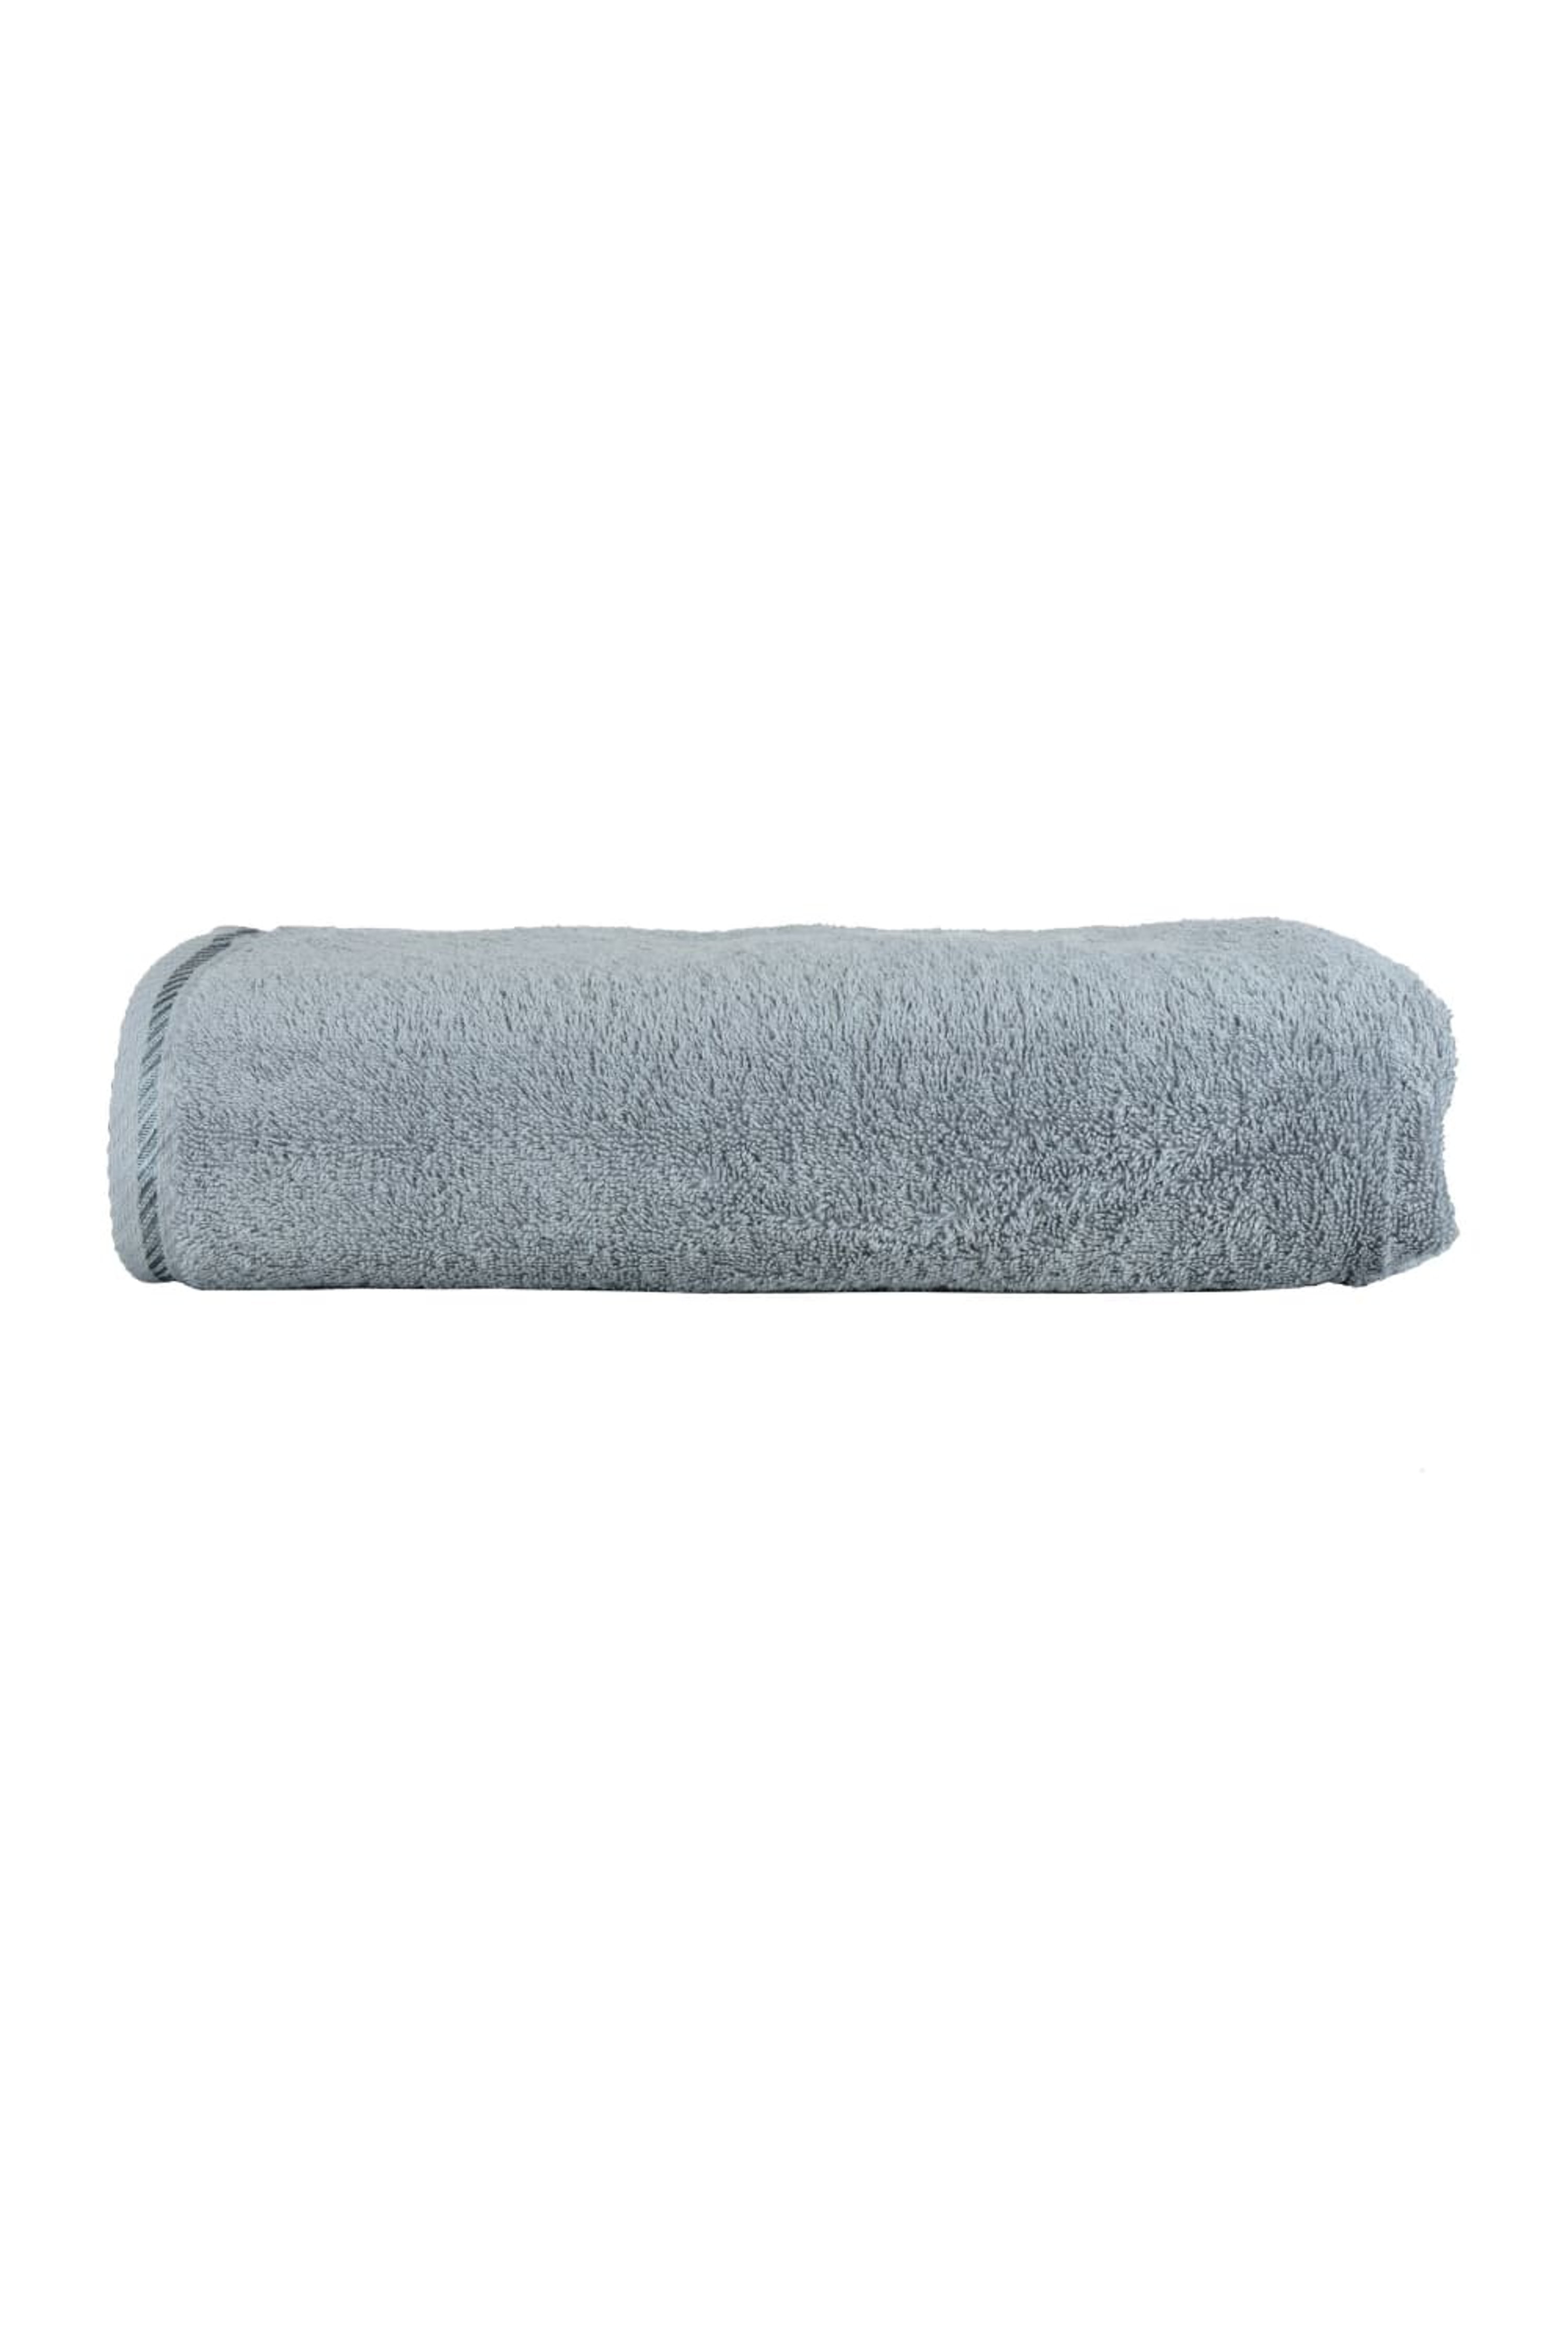 A&R TOWELS A&R TOWELS A&R TOWELS ULTRA SOFT BIG TOWEL (ANTHRACITE GRAY) (ONE SIZE)